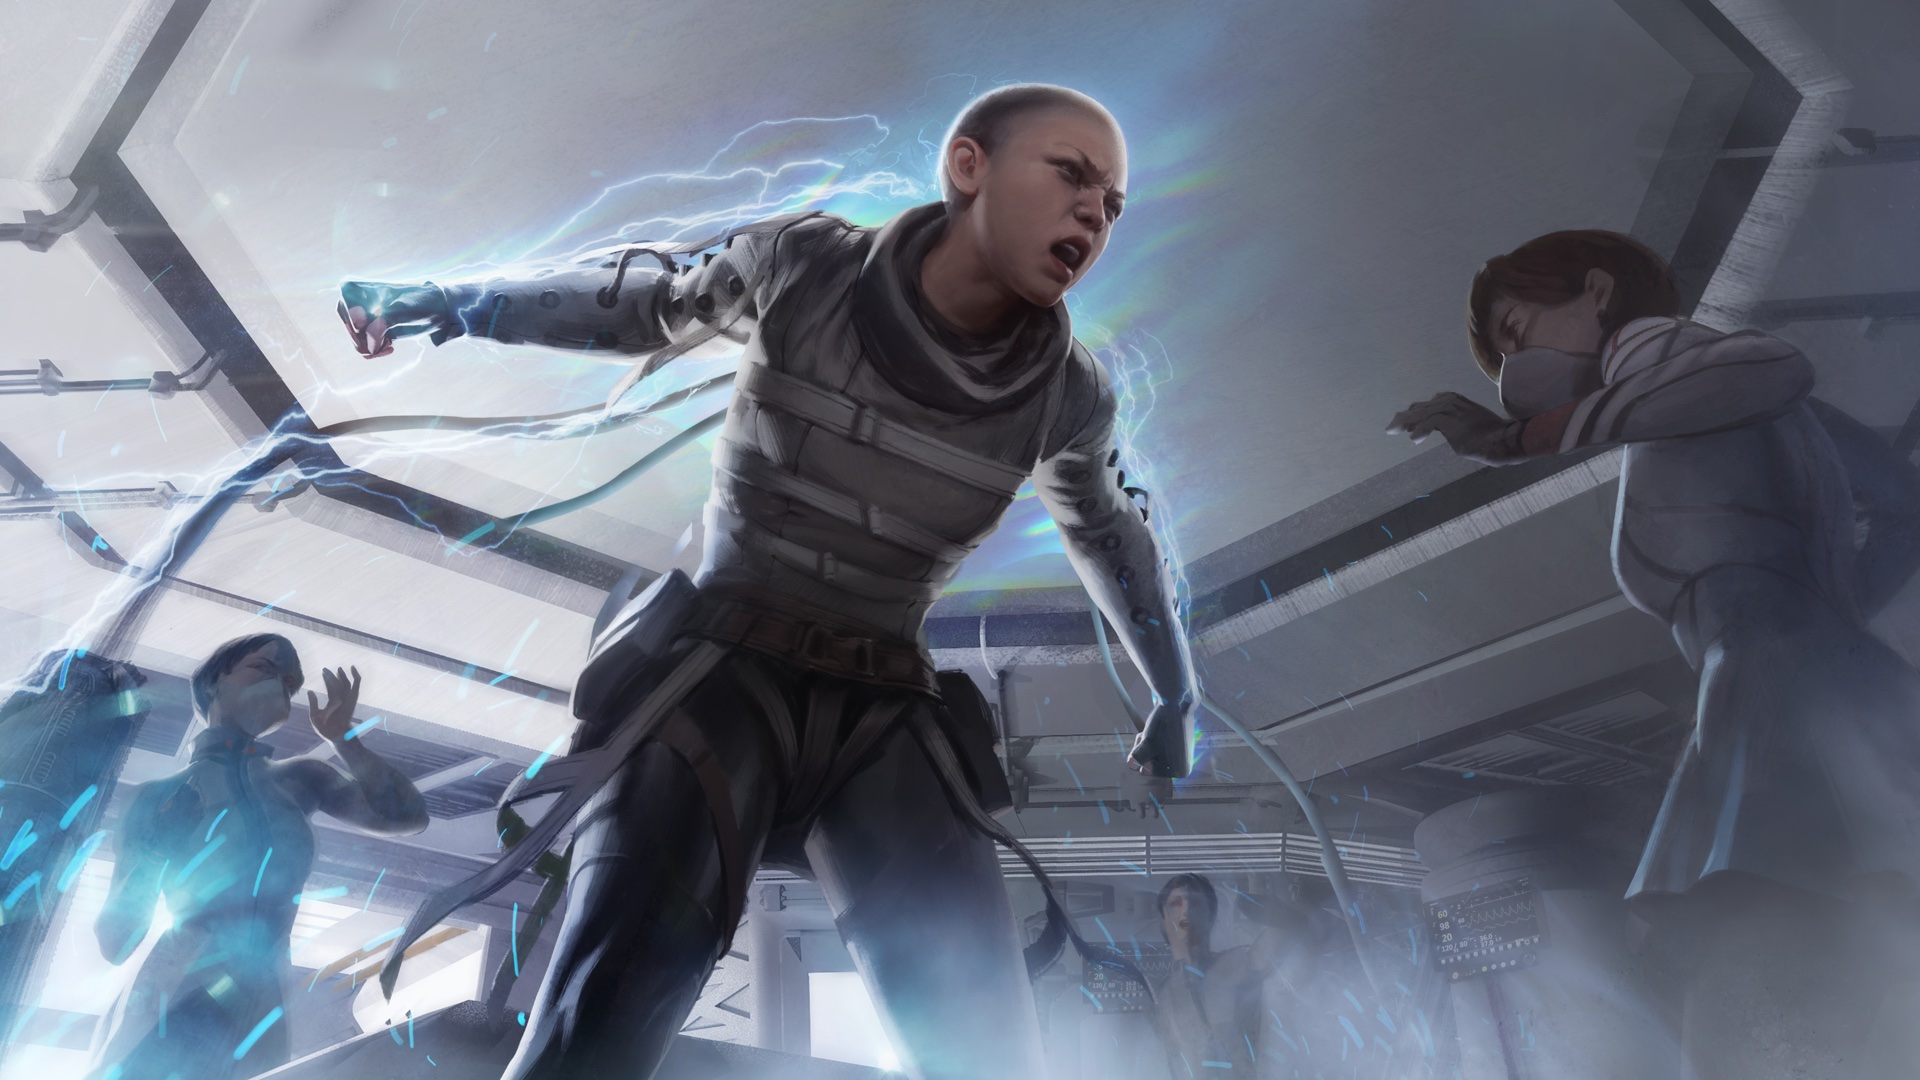 An Apex Legends character shows their strength with clenched fists and electricity flowing around them